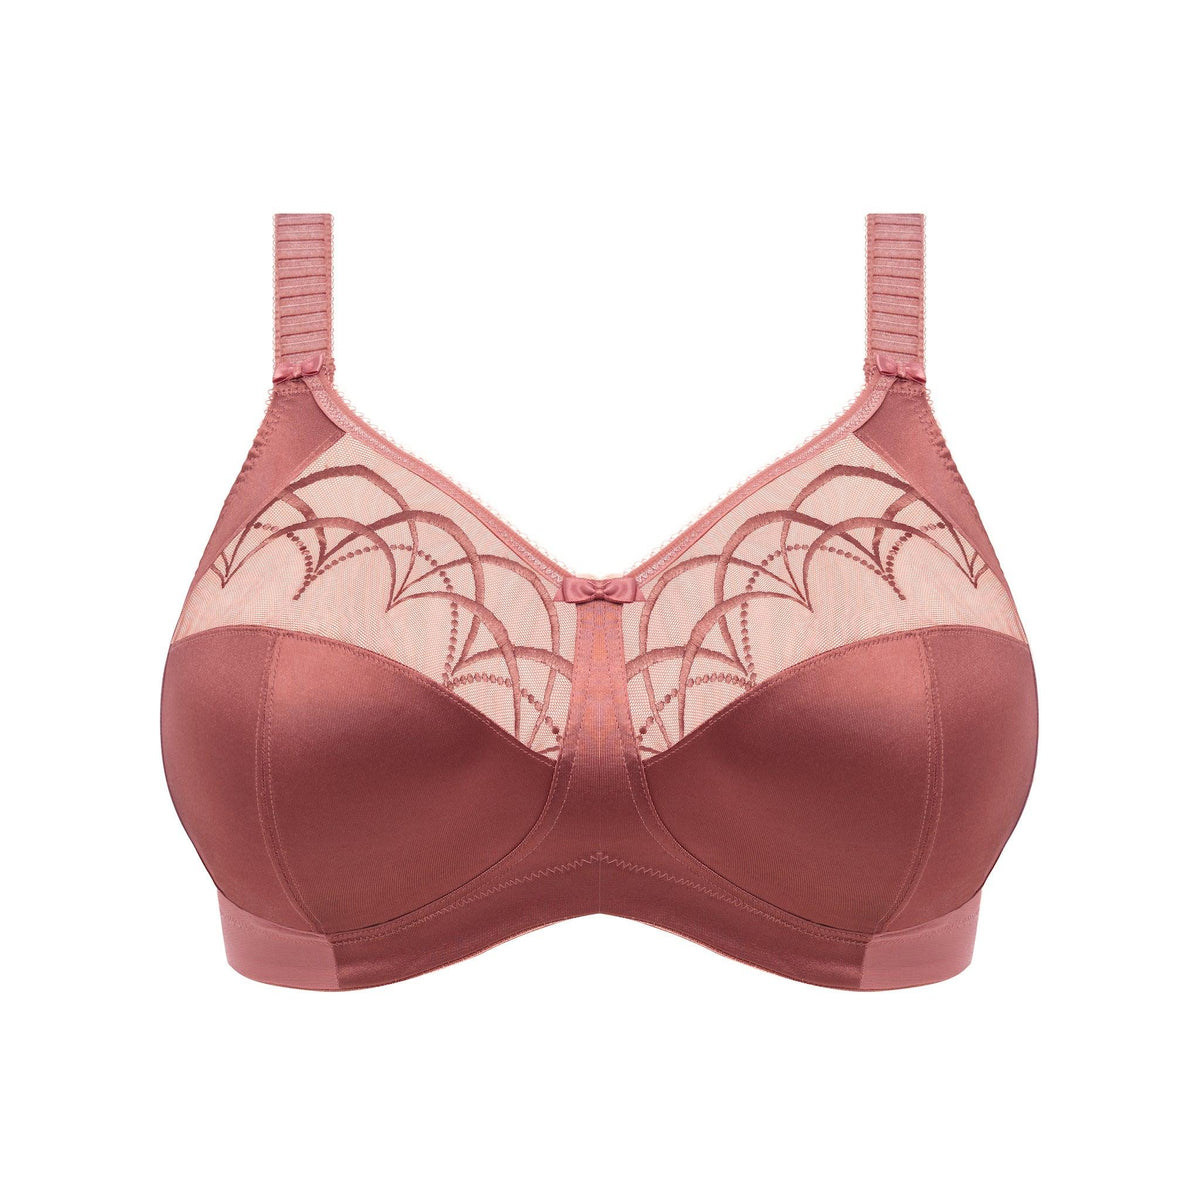 Elomi "Cate" Rosewood Non Wired Bra (B-G) - Lion's Lair Boutique - 36, 38, 40, 42, 44, 46, 48, C, cate, continuity, D, DD, deep cup, E, elomi, F, FF, full cup, G, lingerie, SFT, wireless - Elomi